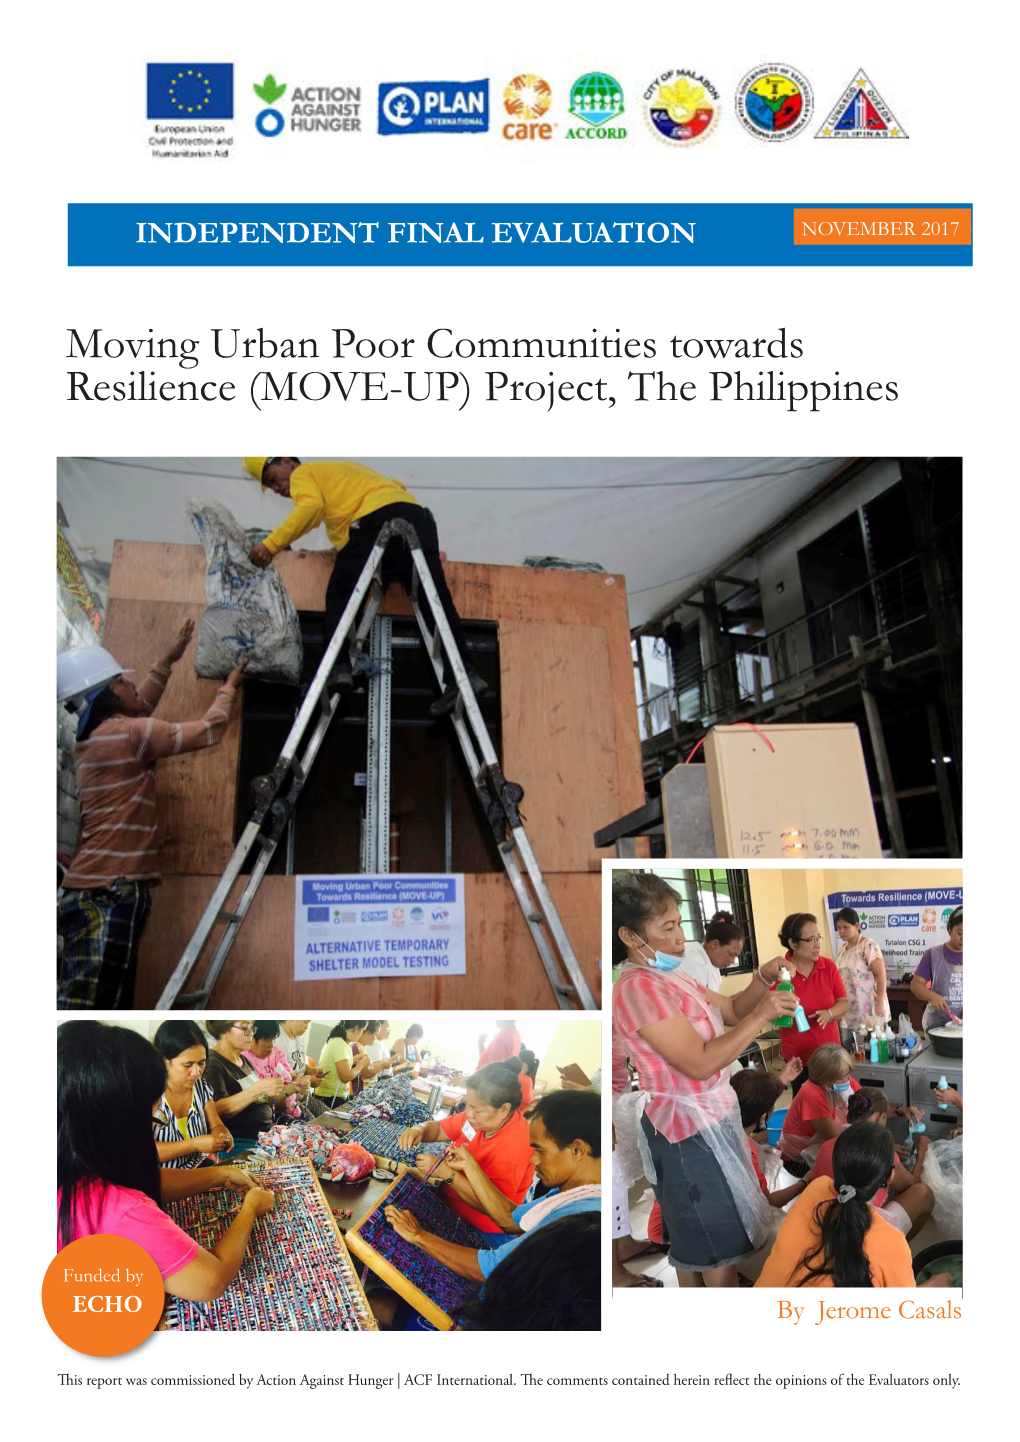 Moving Urban Poor Communities Towards Resilience (MOVE-UP) Project, the Philippines